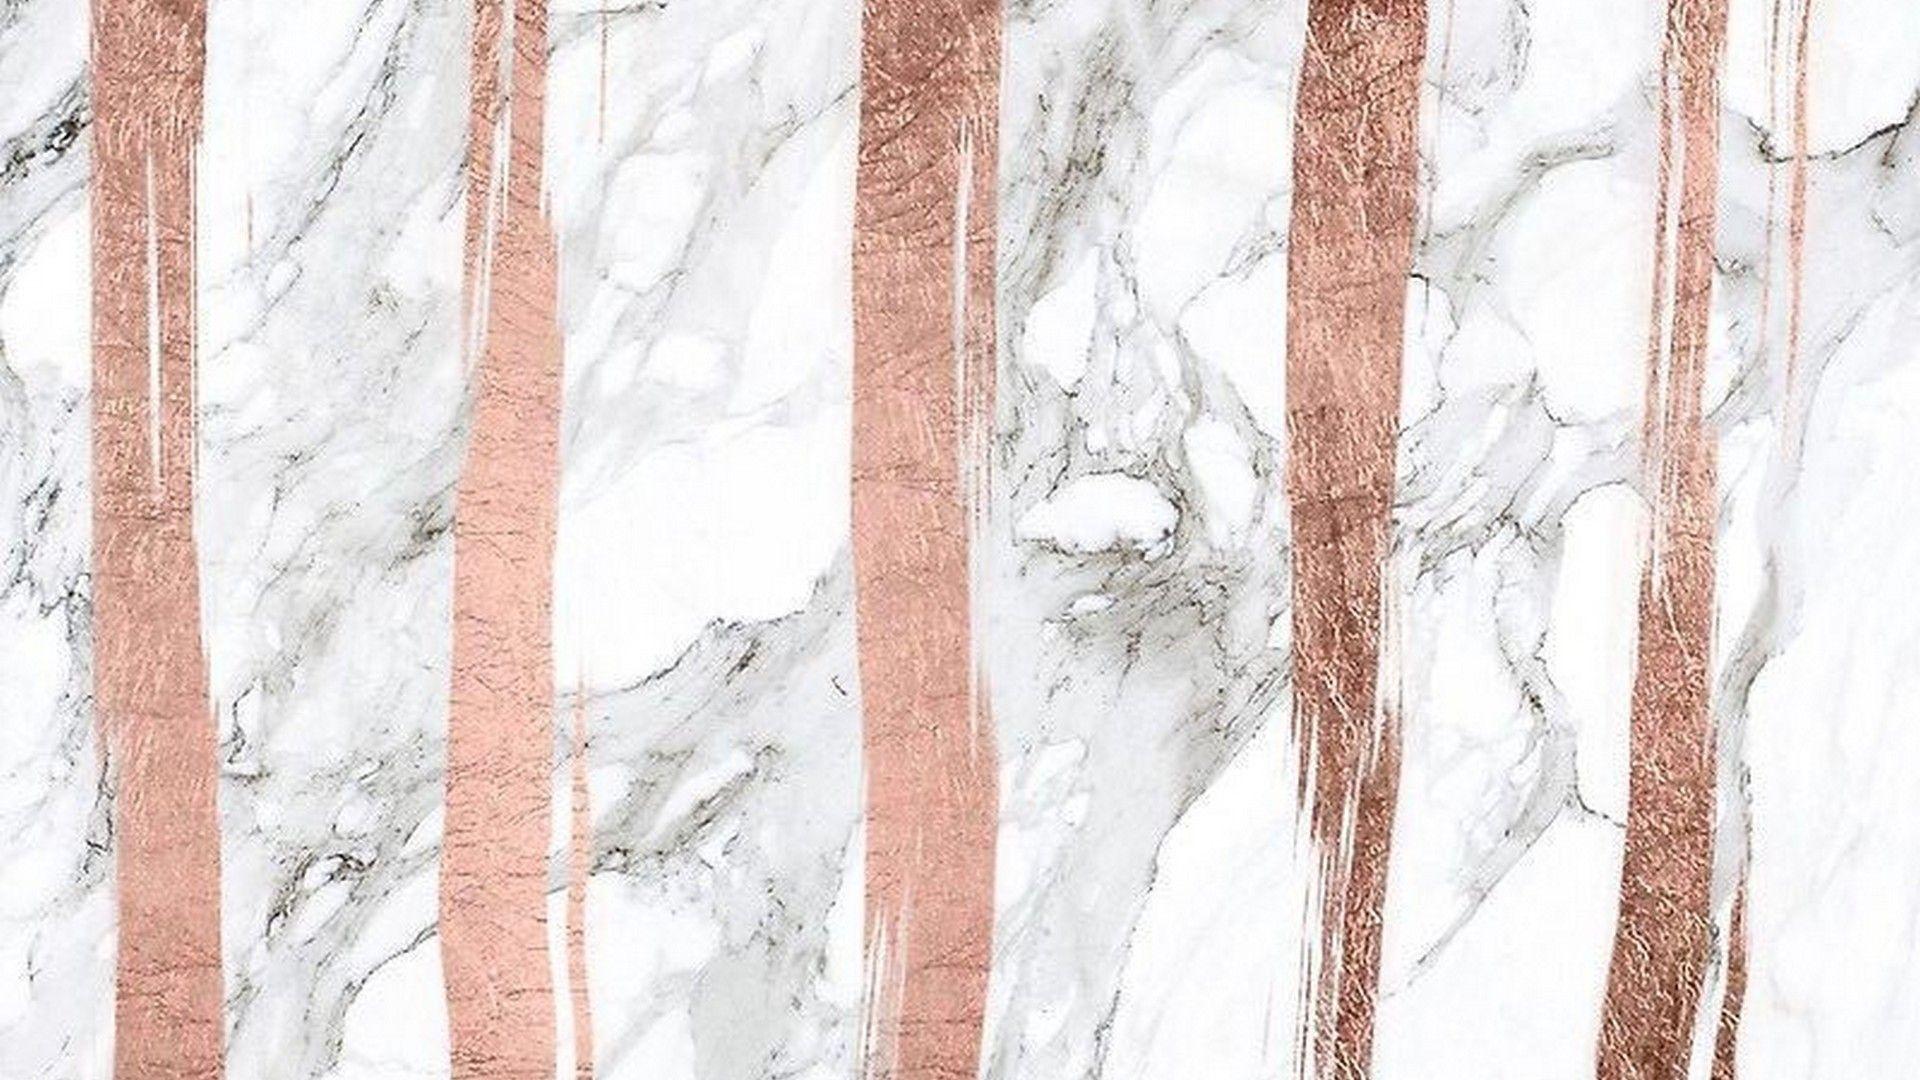 Tumblr Marble Desktop Wallpapers Top Free Tumblr Marble Desktop Backgrounds Wallpaperaccess Cute iphone wallpaper marble rose gold and gold cellphone. tumblr marble desktop wallpapers top